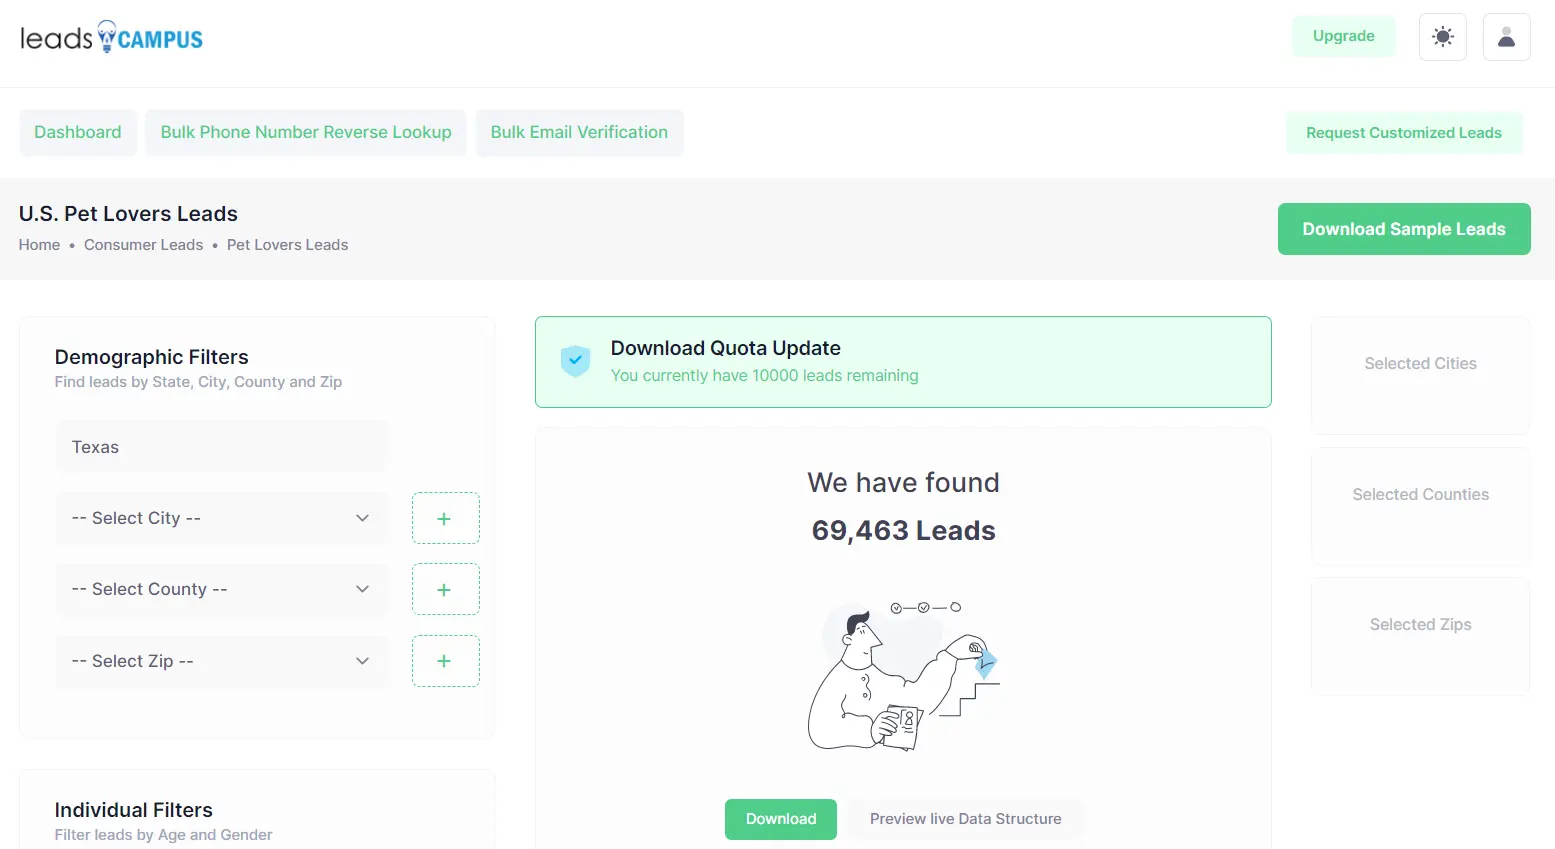 How to download US pet owner database from Leadscampus